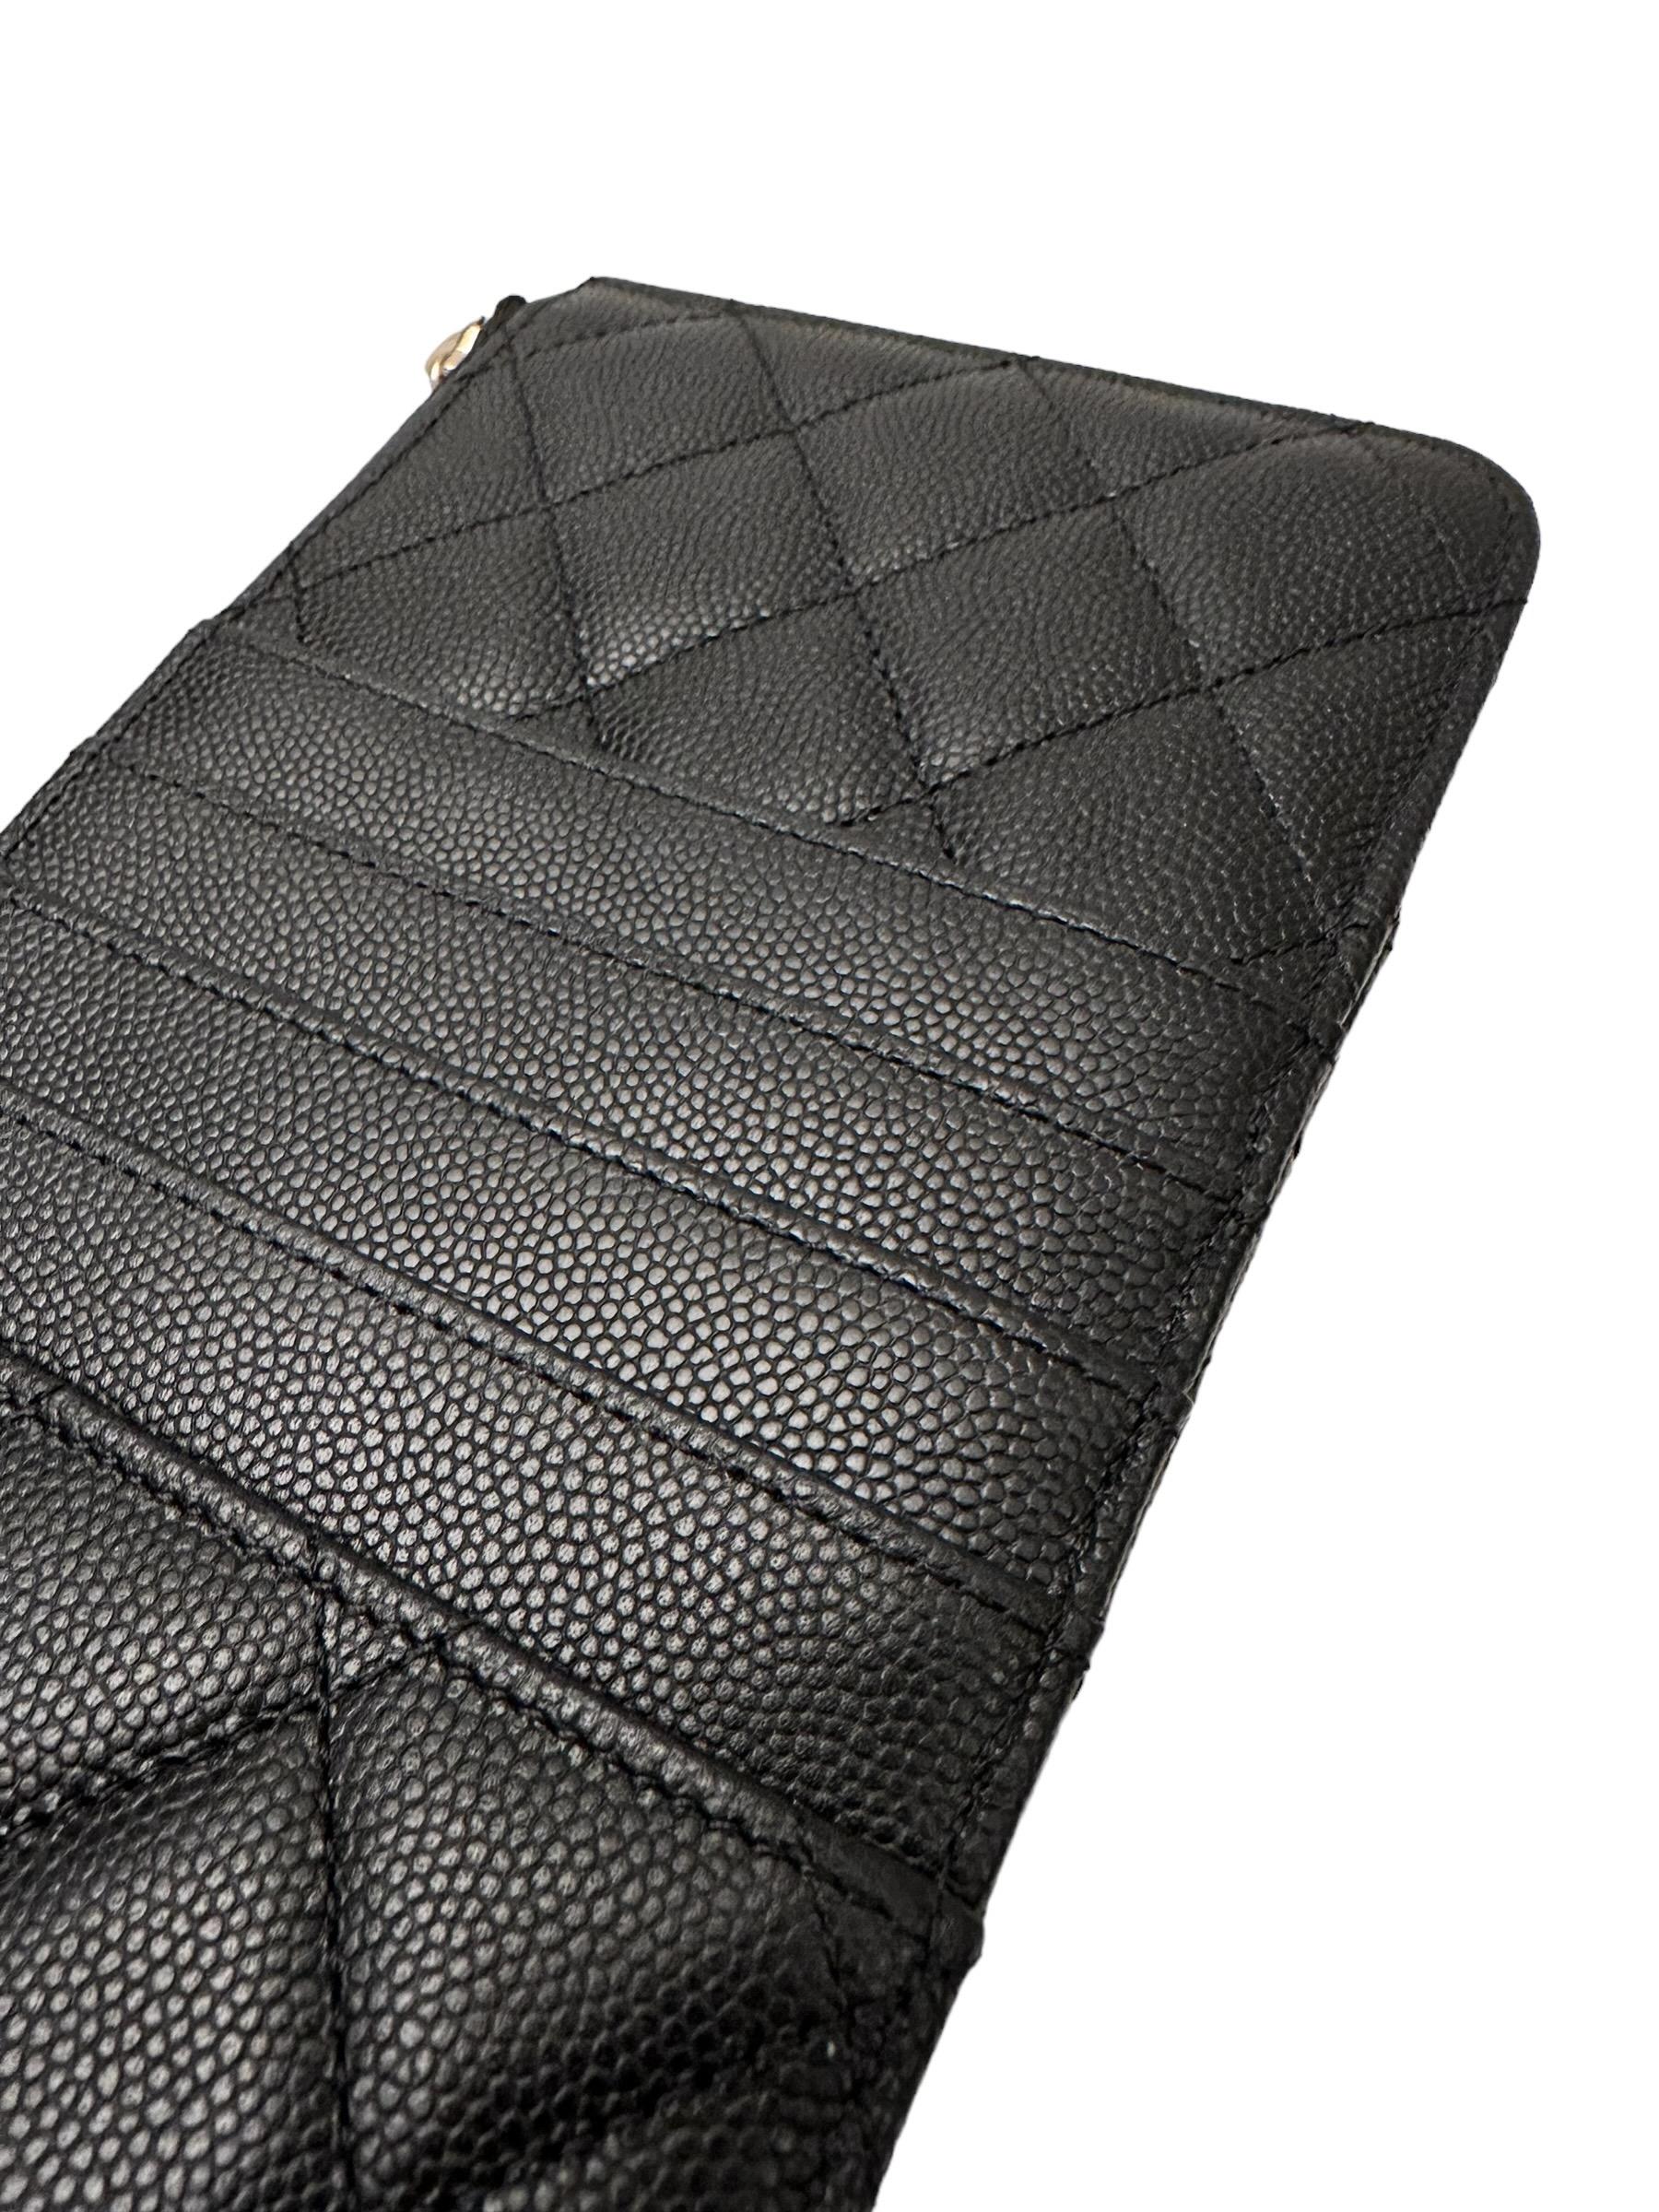 Chanel Black Caviar Leather Diamond Quilted Flat Wallet 1